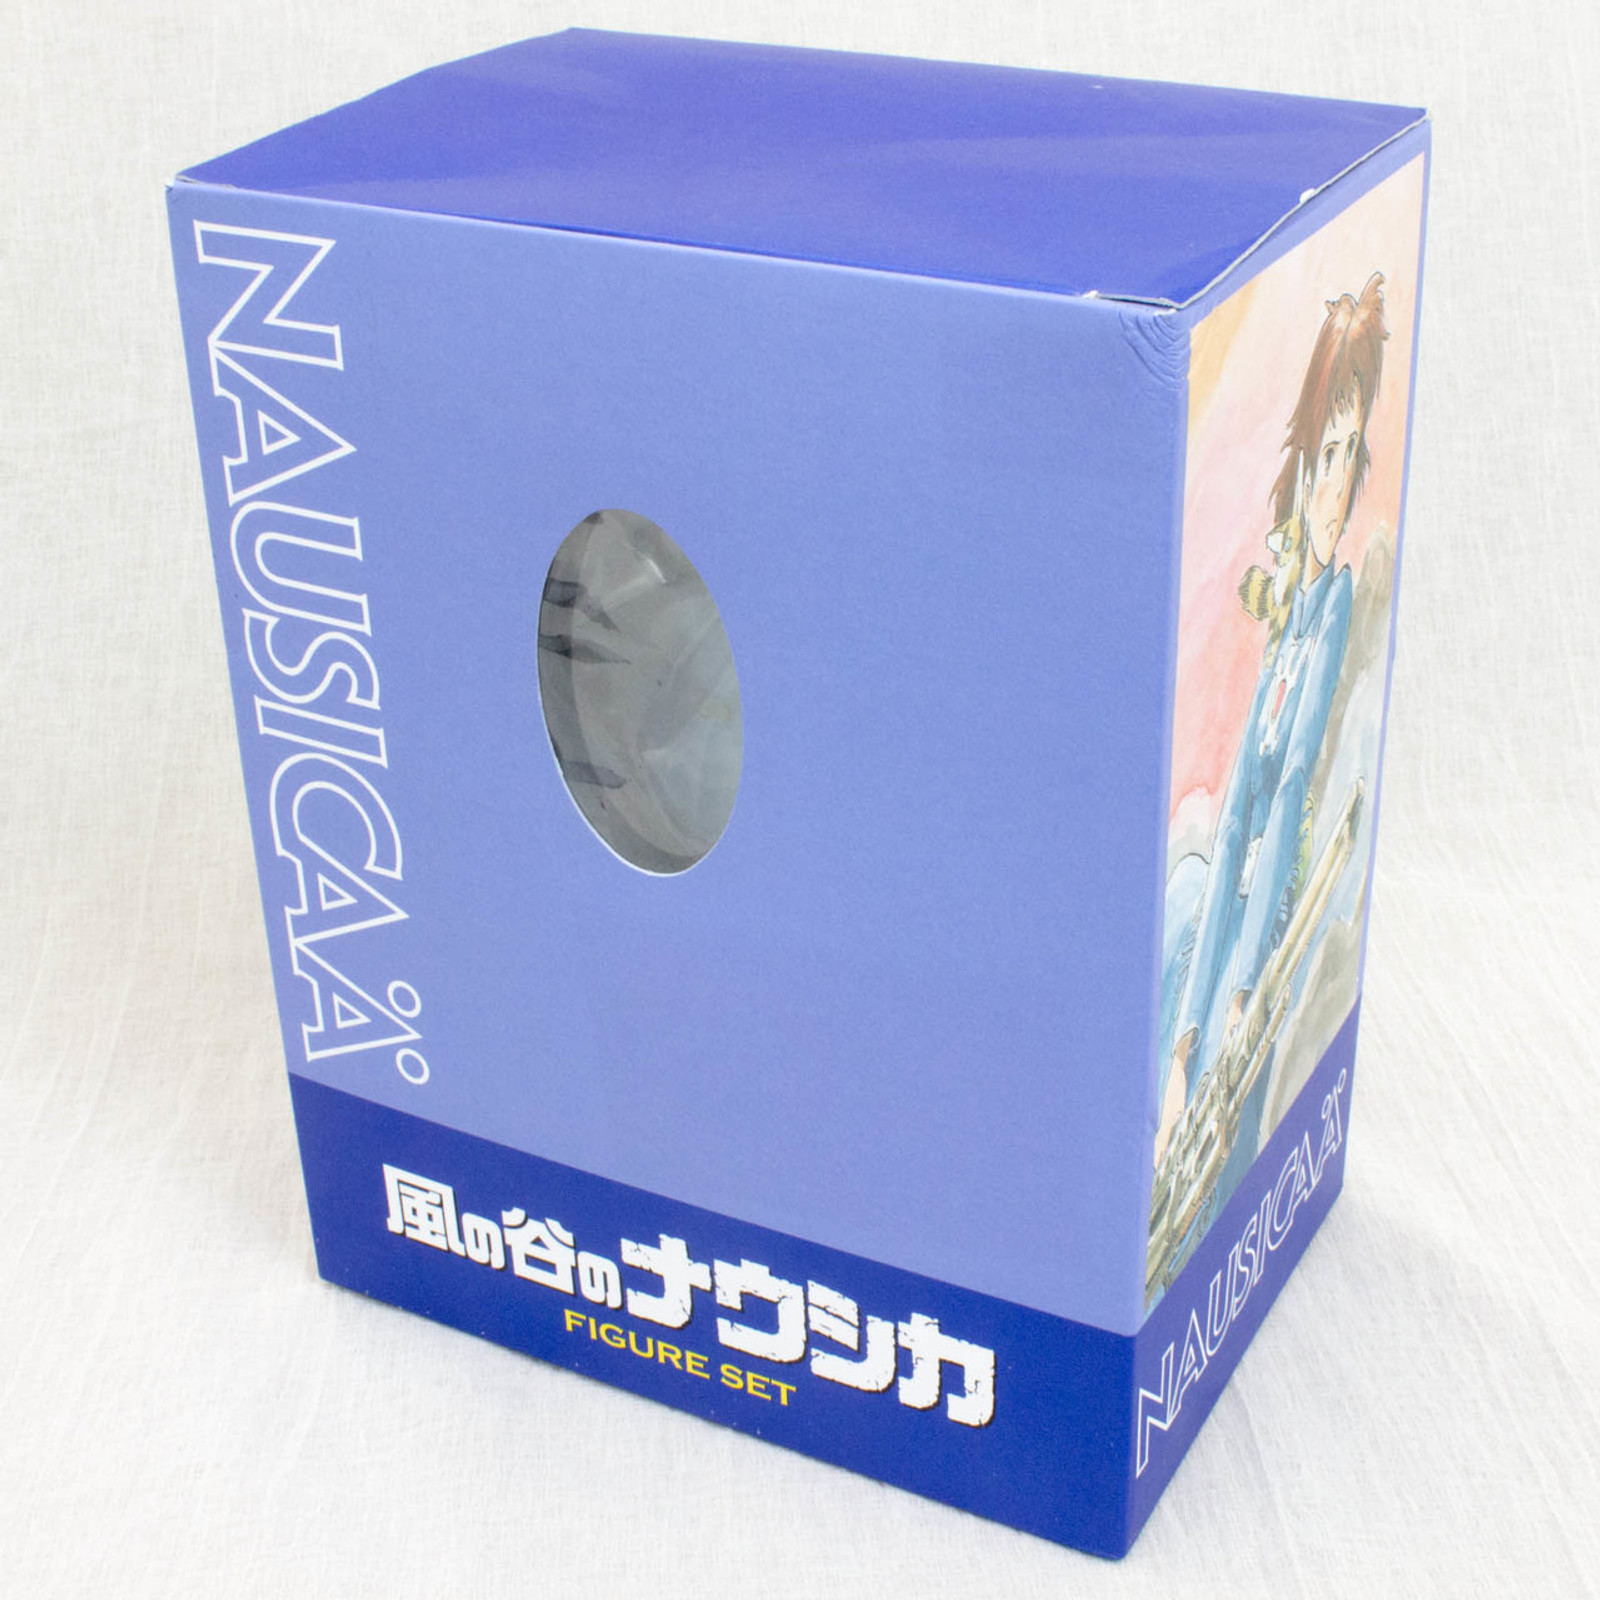 Nausicaa of the Valley of the Wind Ceramic Figure & DVD Case Pouch Ghibli